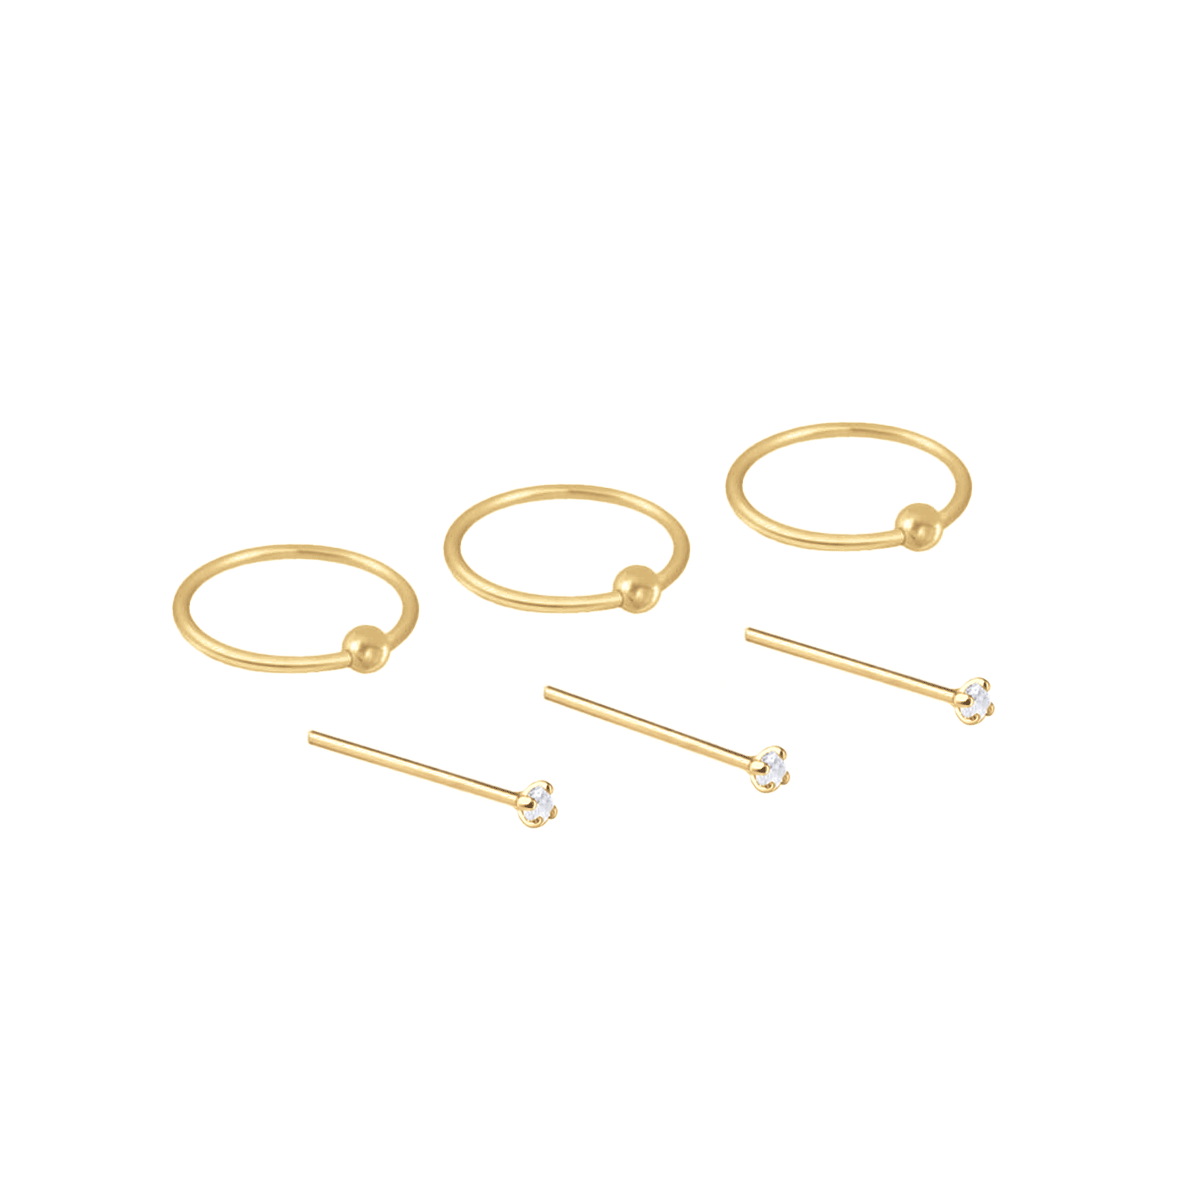 Astral Nose Ring Set | Static Jewellery